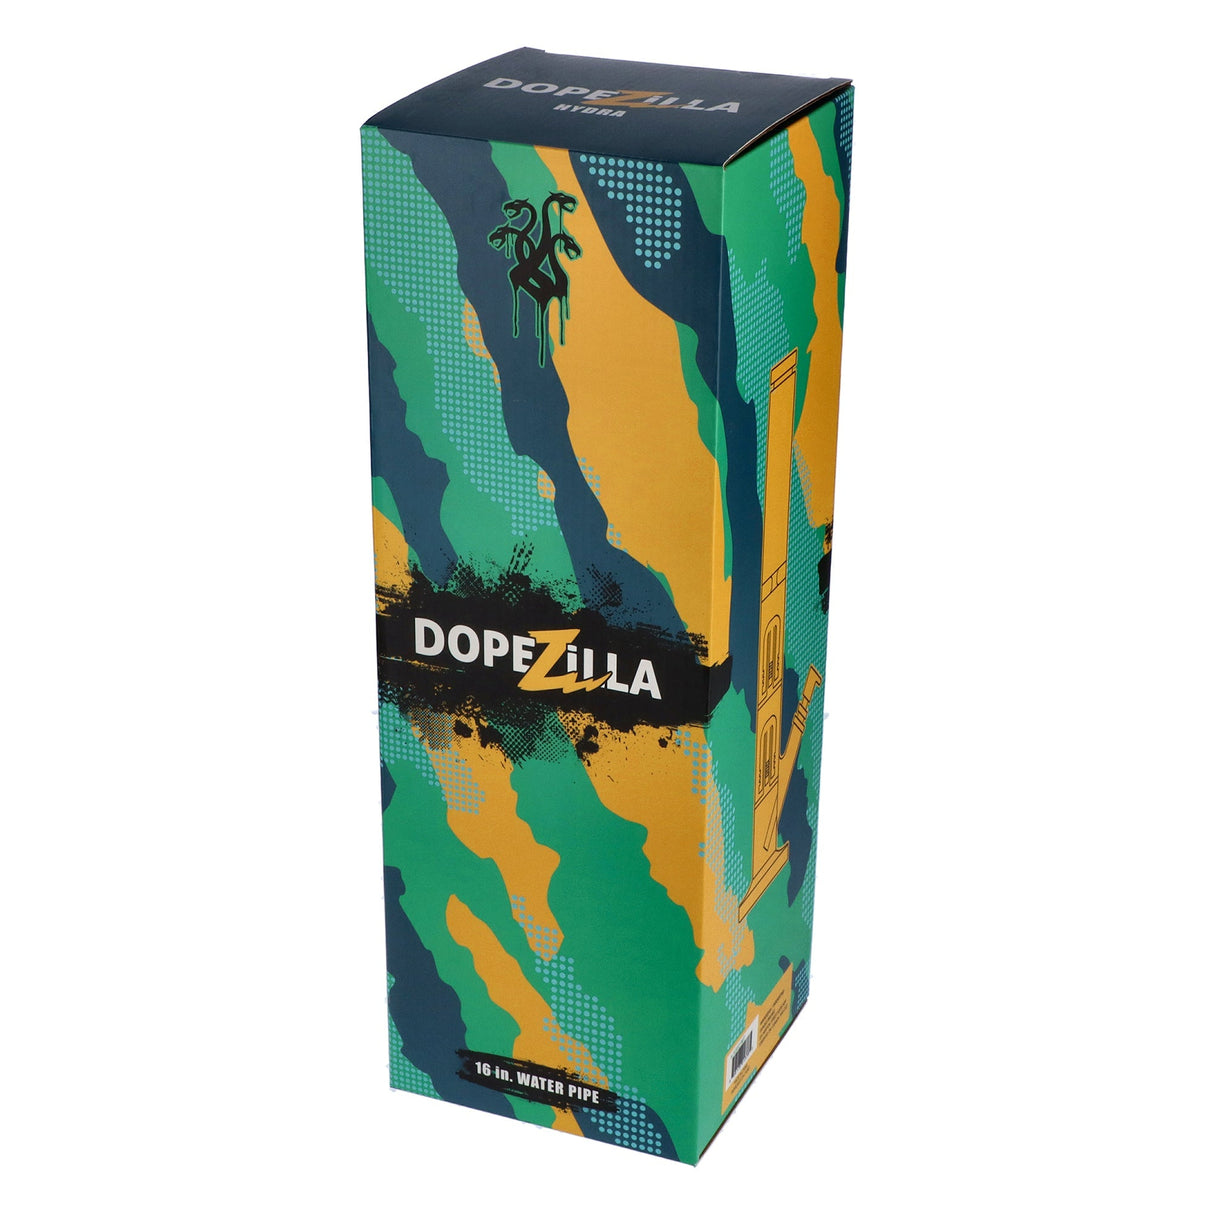 Dopezilla Hydra 16" Straight Water Pipe packaging with colorful design, front view